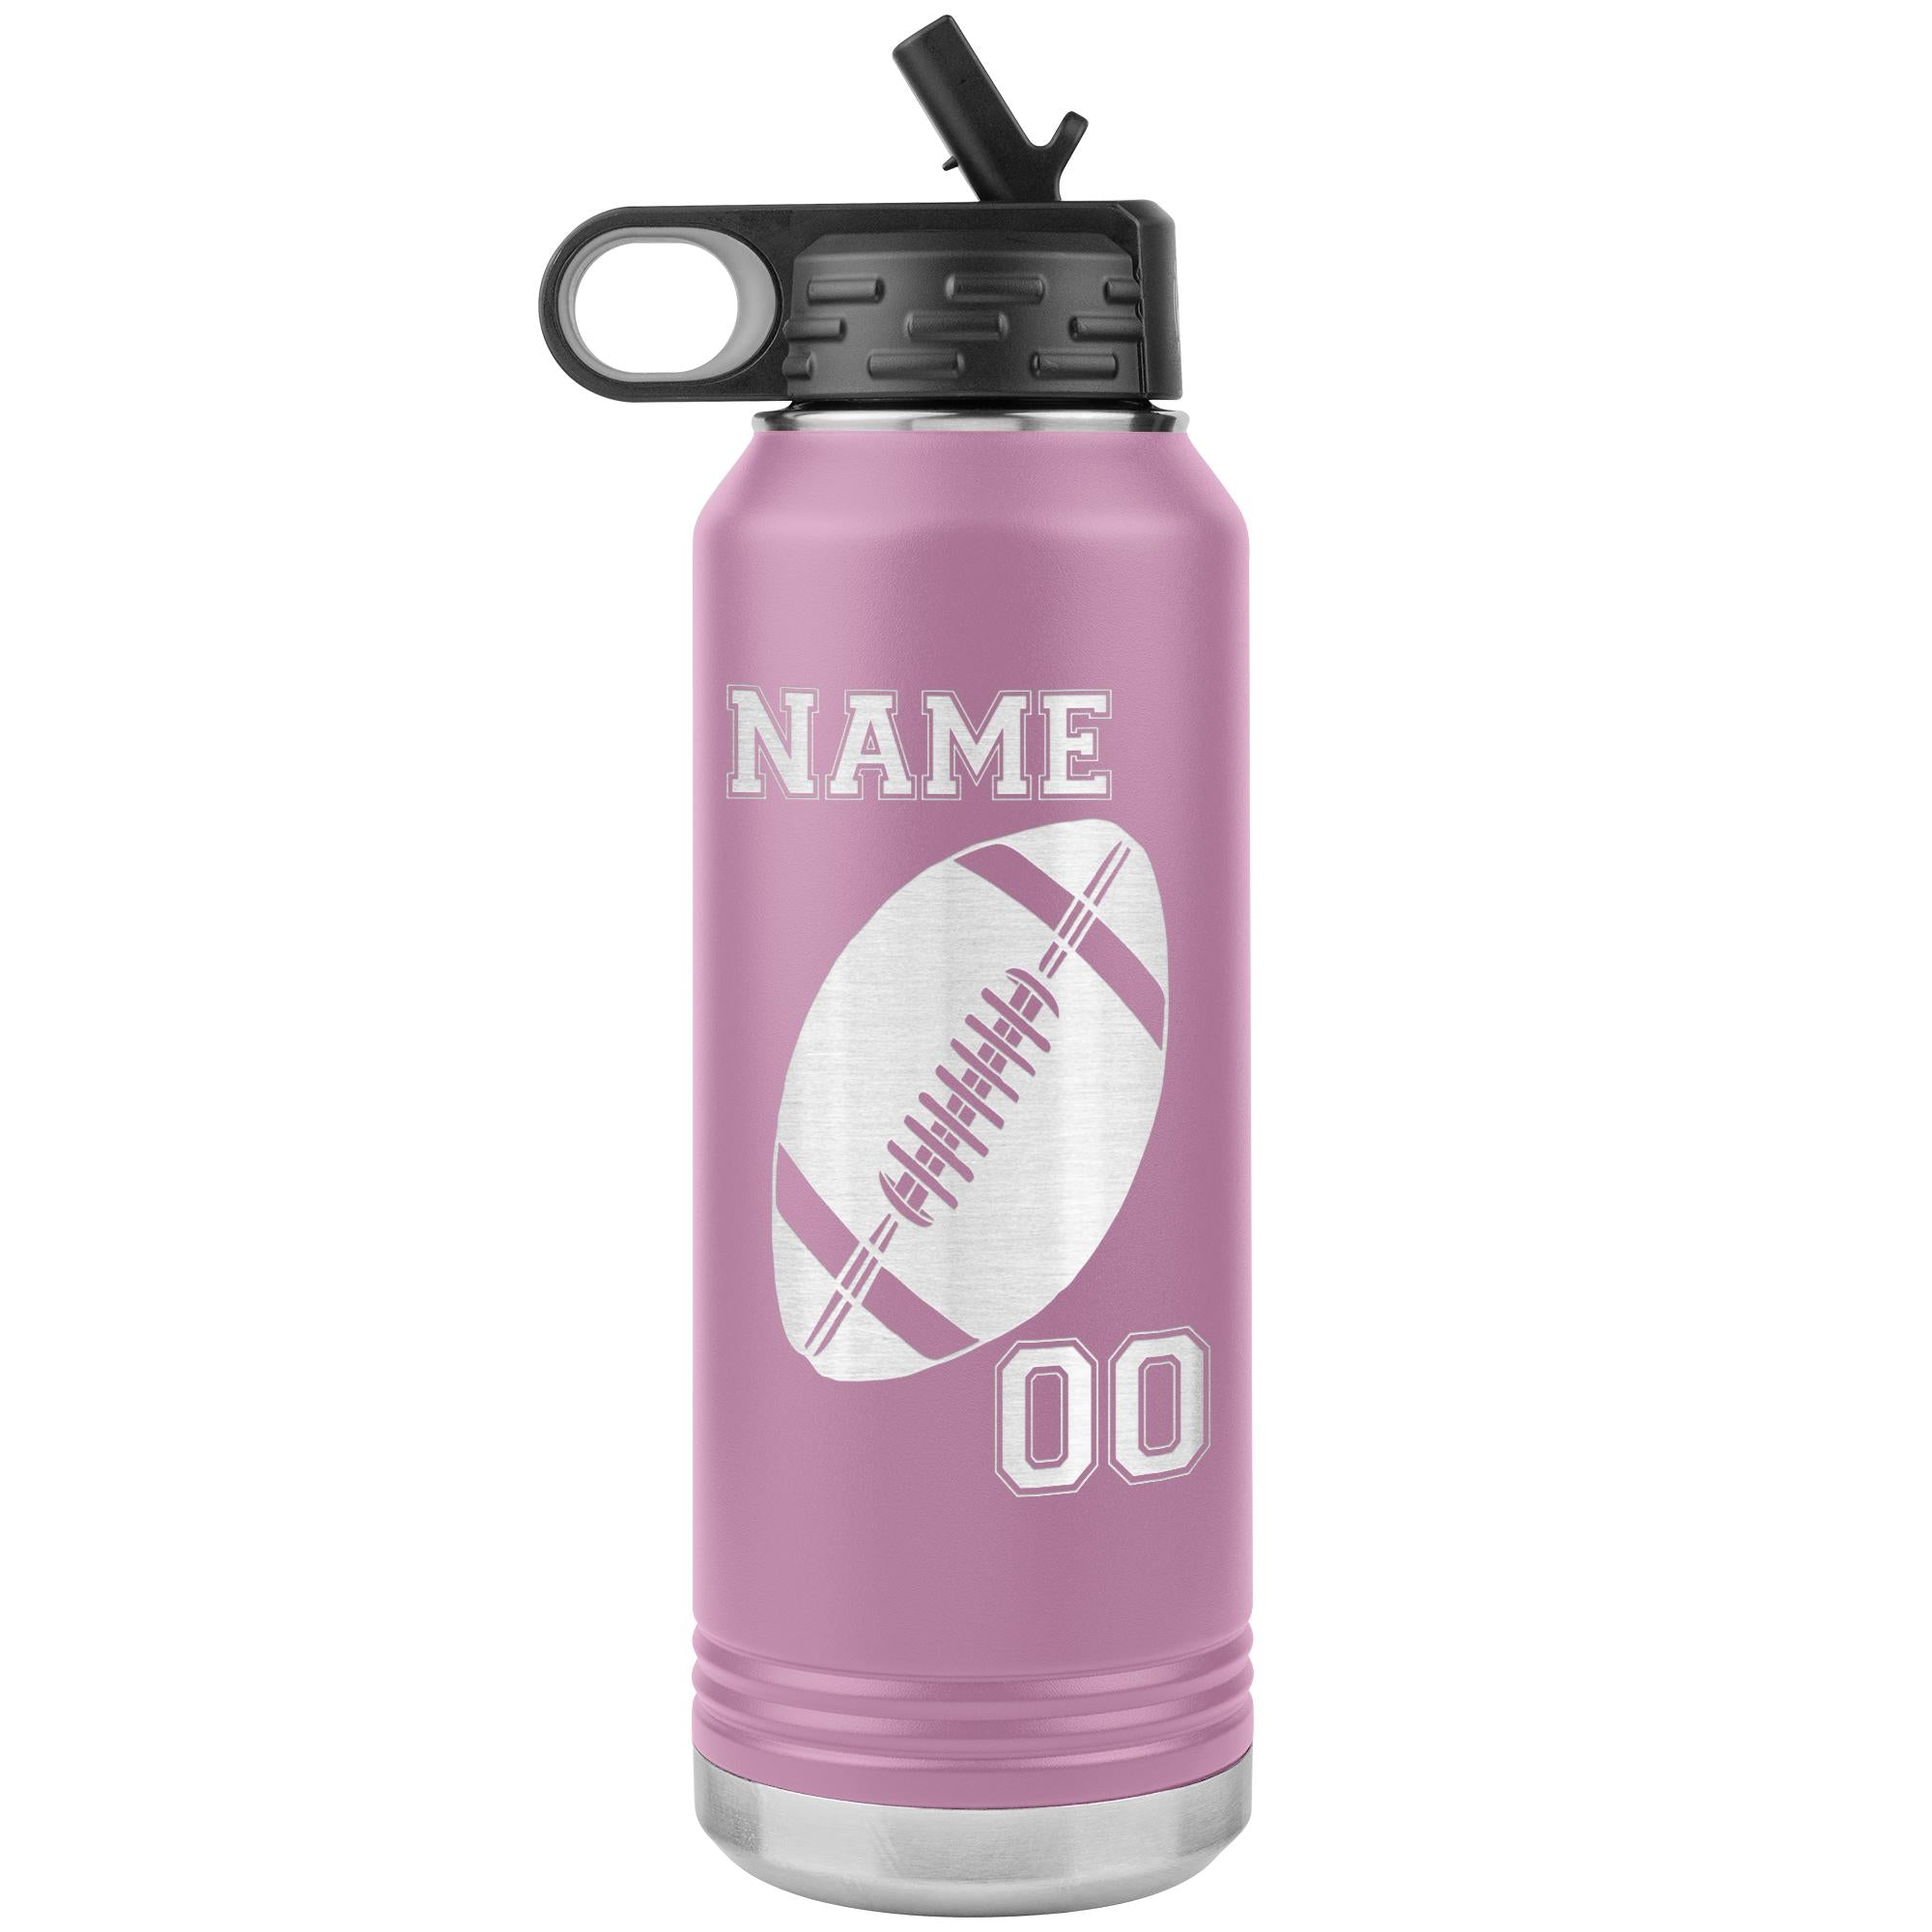  Alterd Industries Soccer Water Bottle - Personalized Soccer  Gift, Player Water Bottle, 32oz insulated tumbler with lid, Soccer Water  Bottle for Girls, For Boys